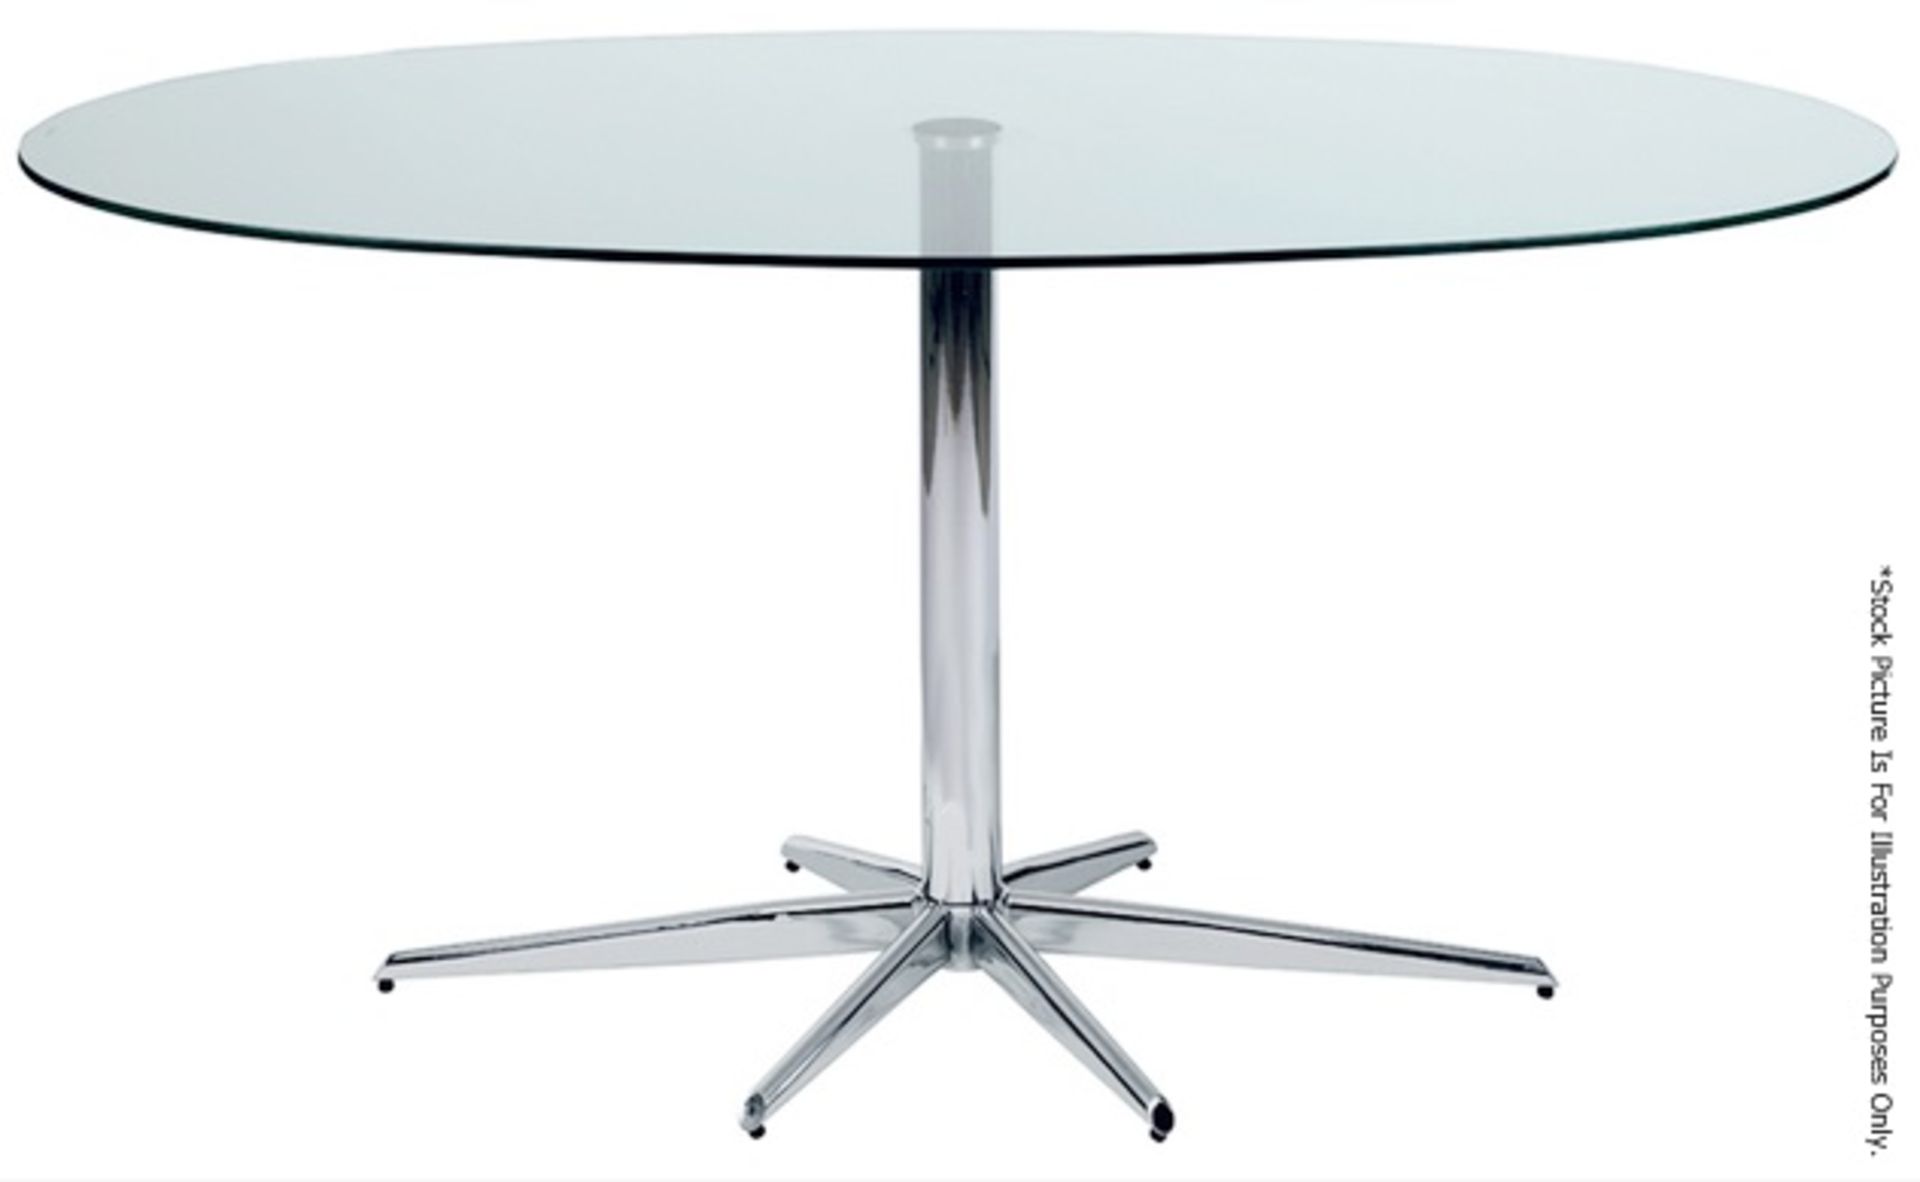 Large Designer Oval Glass Topped Dining Table and 4 x Calligaris "New York" Genuine Leather Side - Image 6 of 14